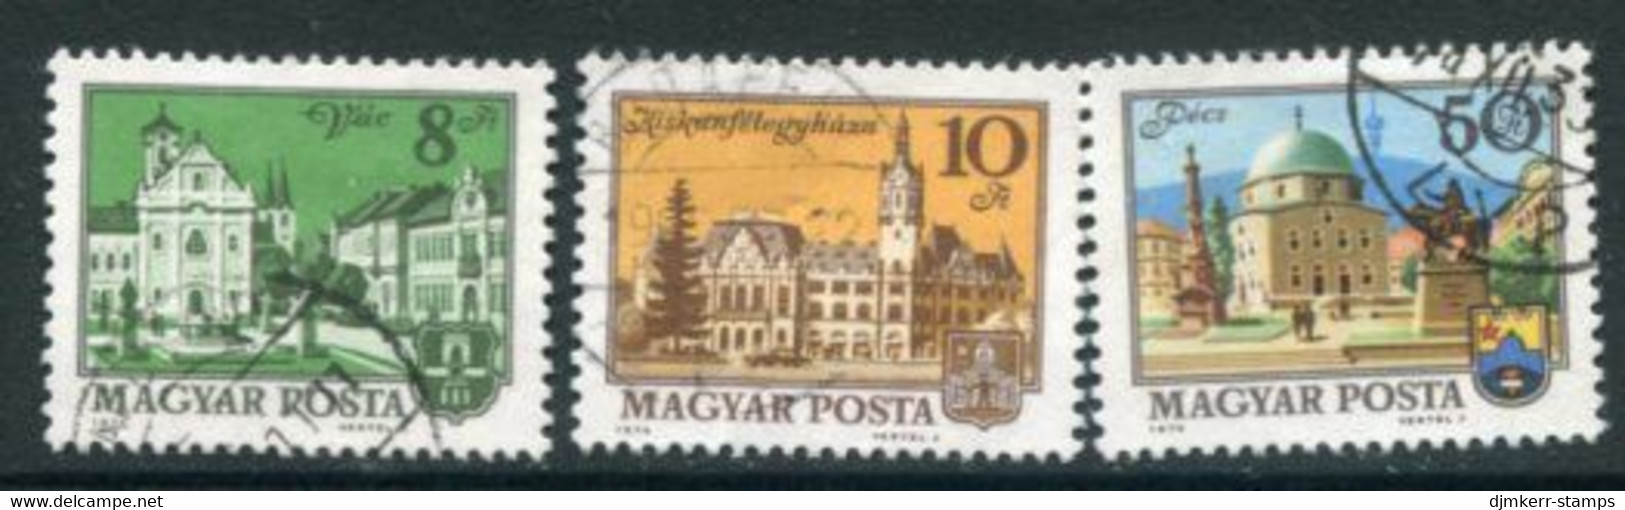 HUNGARY 1974 Towns Definitive 8, 10, 50 Ft. Used.  Michel 3001-003 - Usati